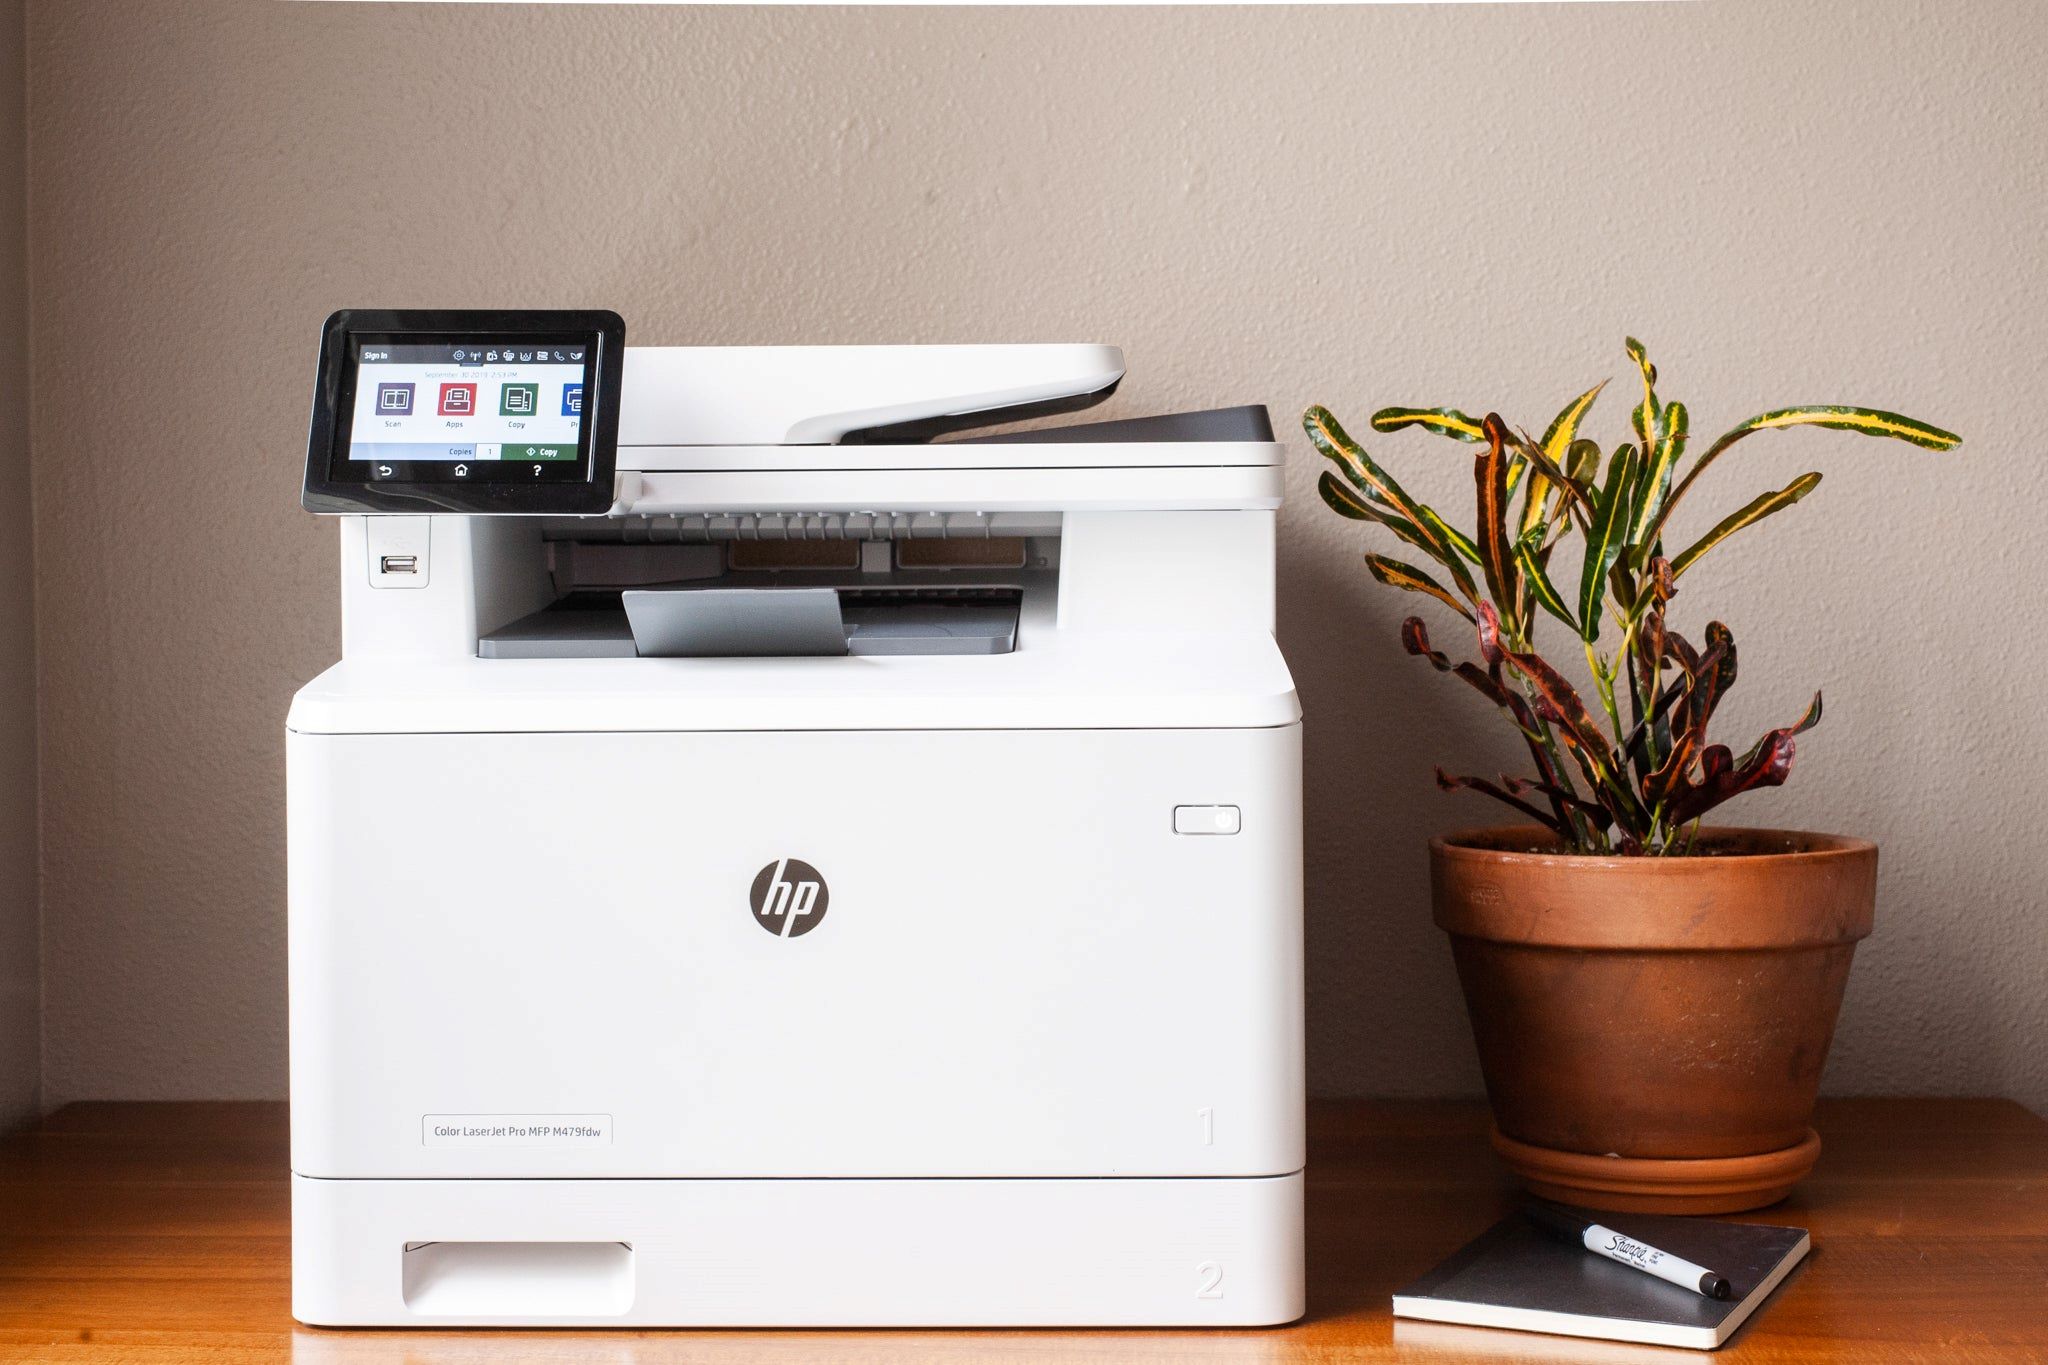 How To Set Up Wi-Fi To HP Printer